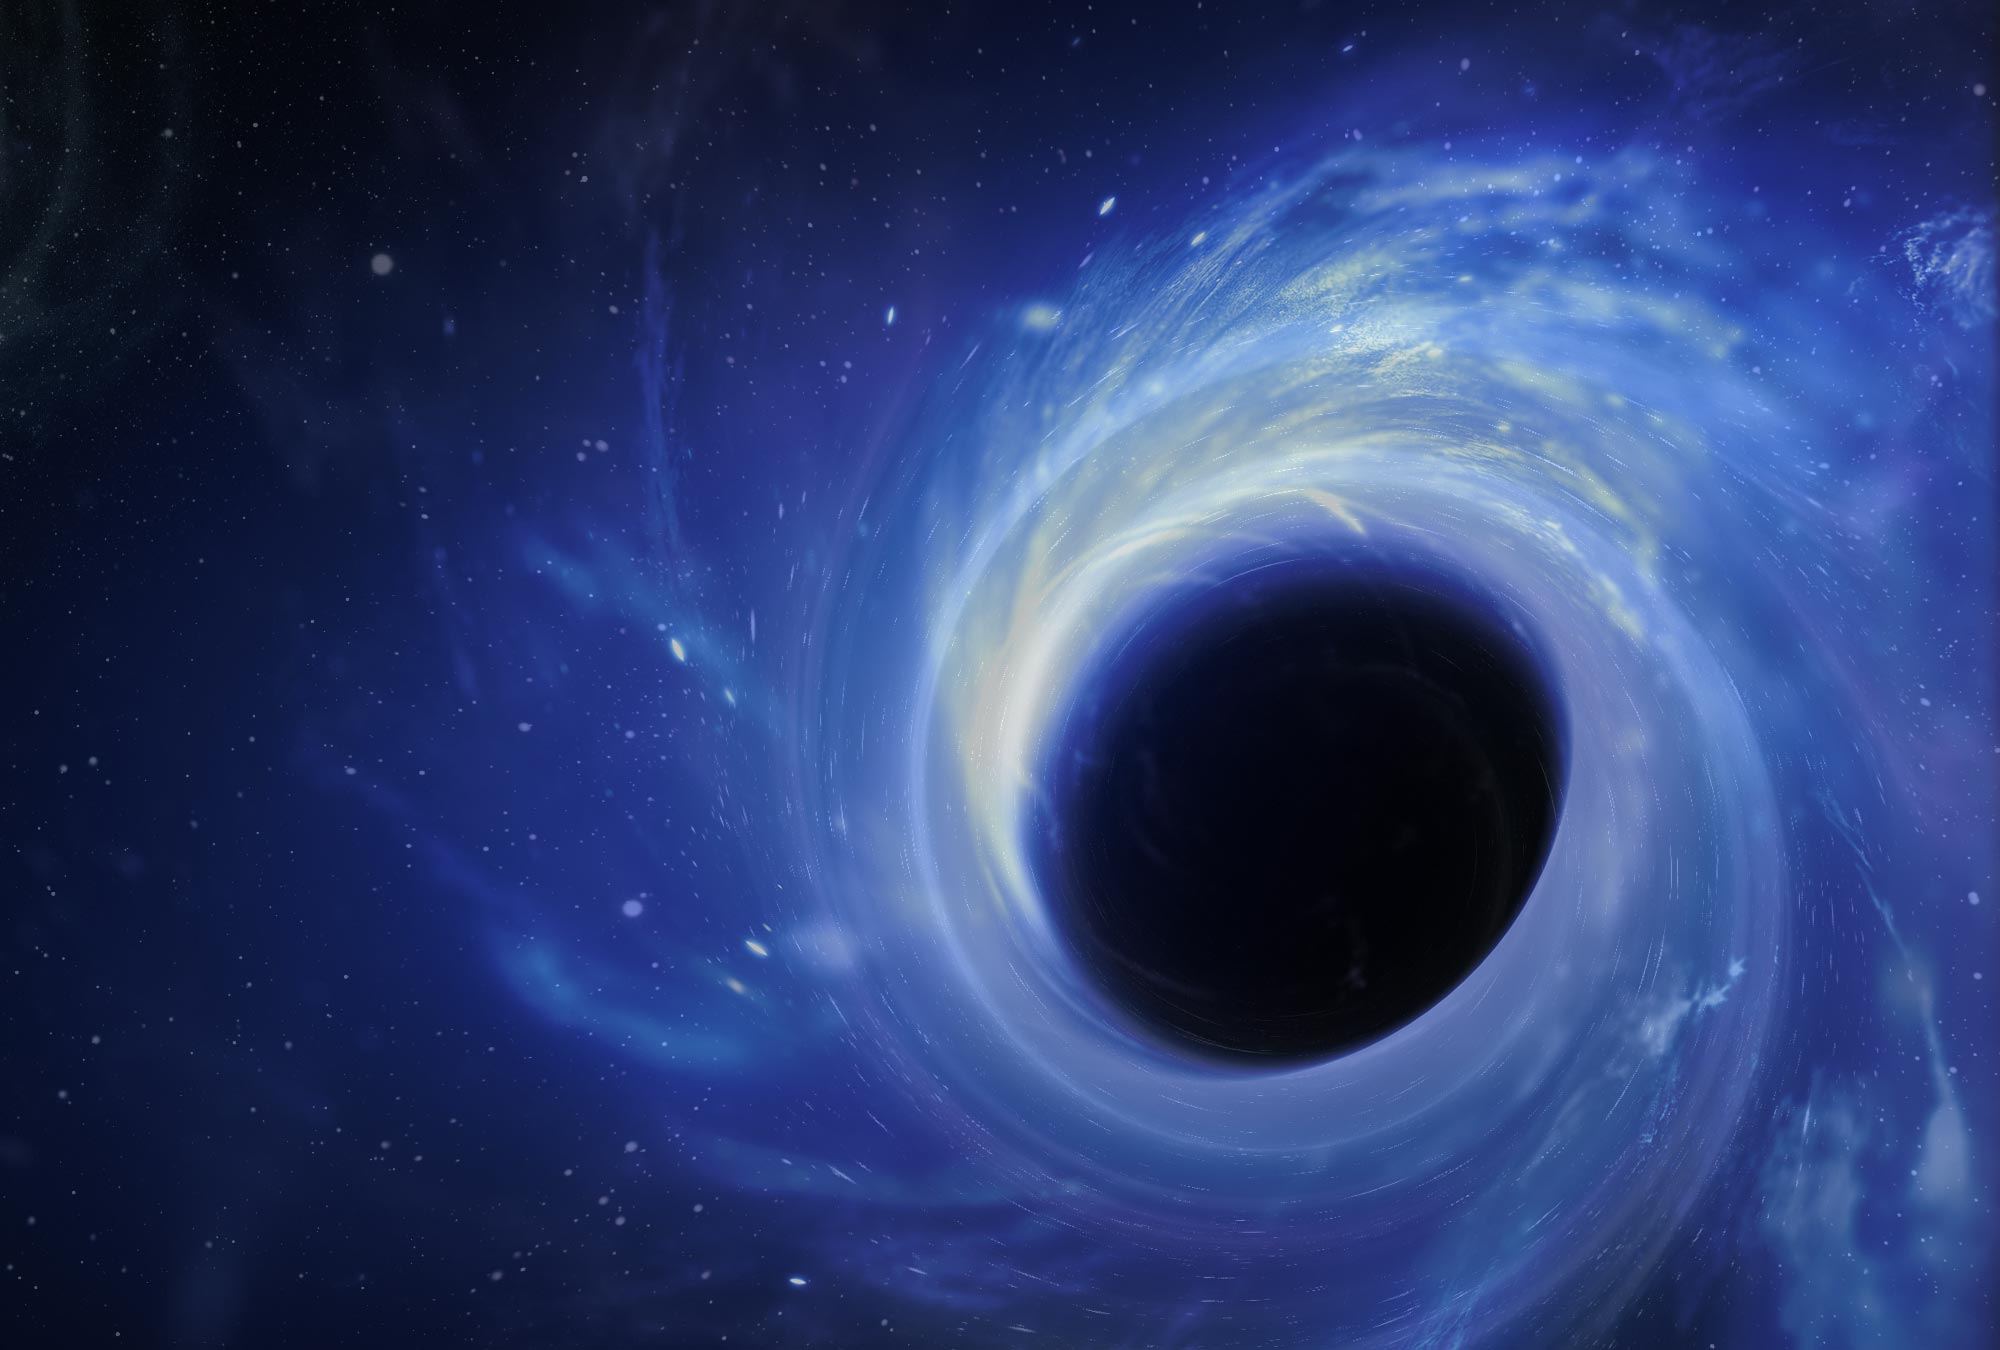 Are Black Holes Made of Dark Energy? Error Made When Applying Einstein's Equations to Model Growth of the Universe?